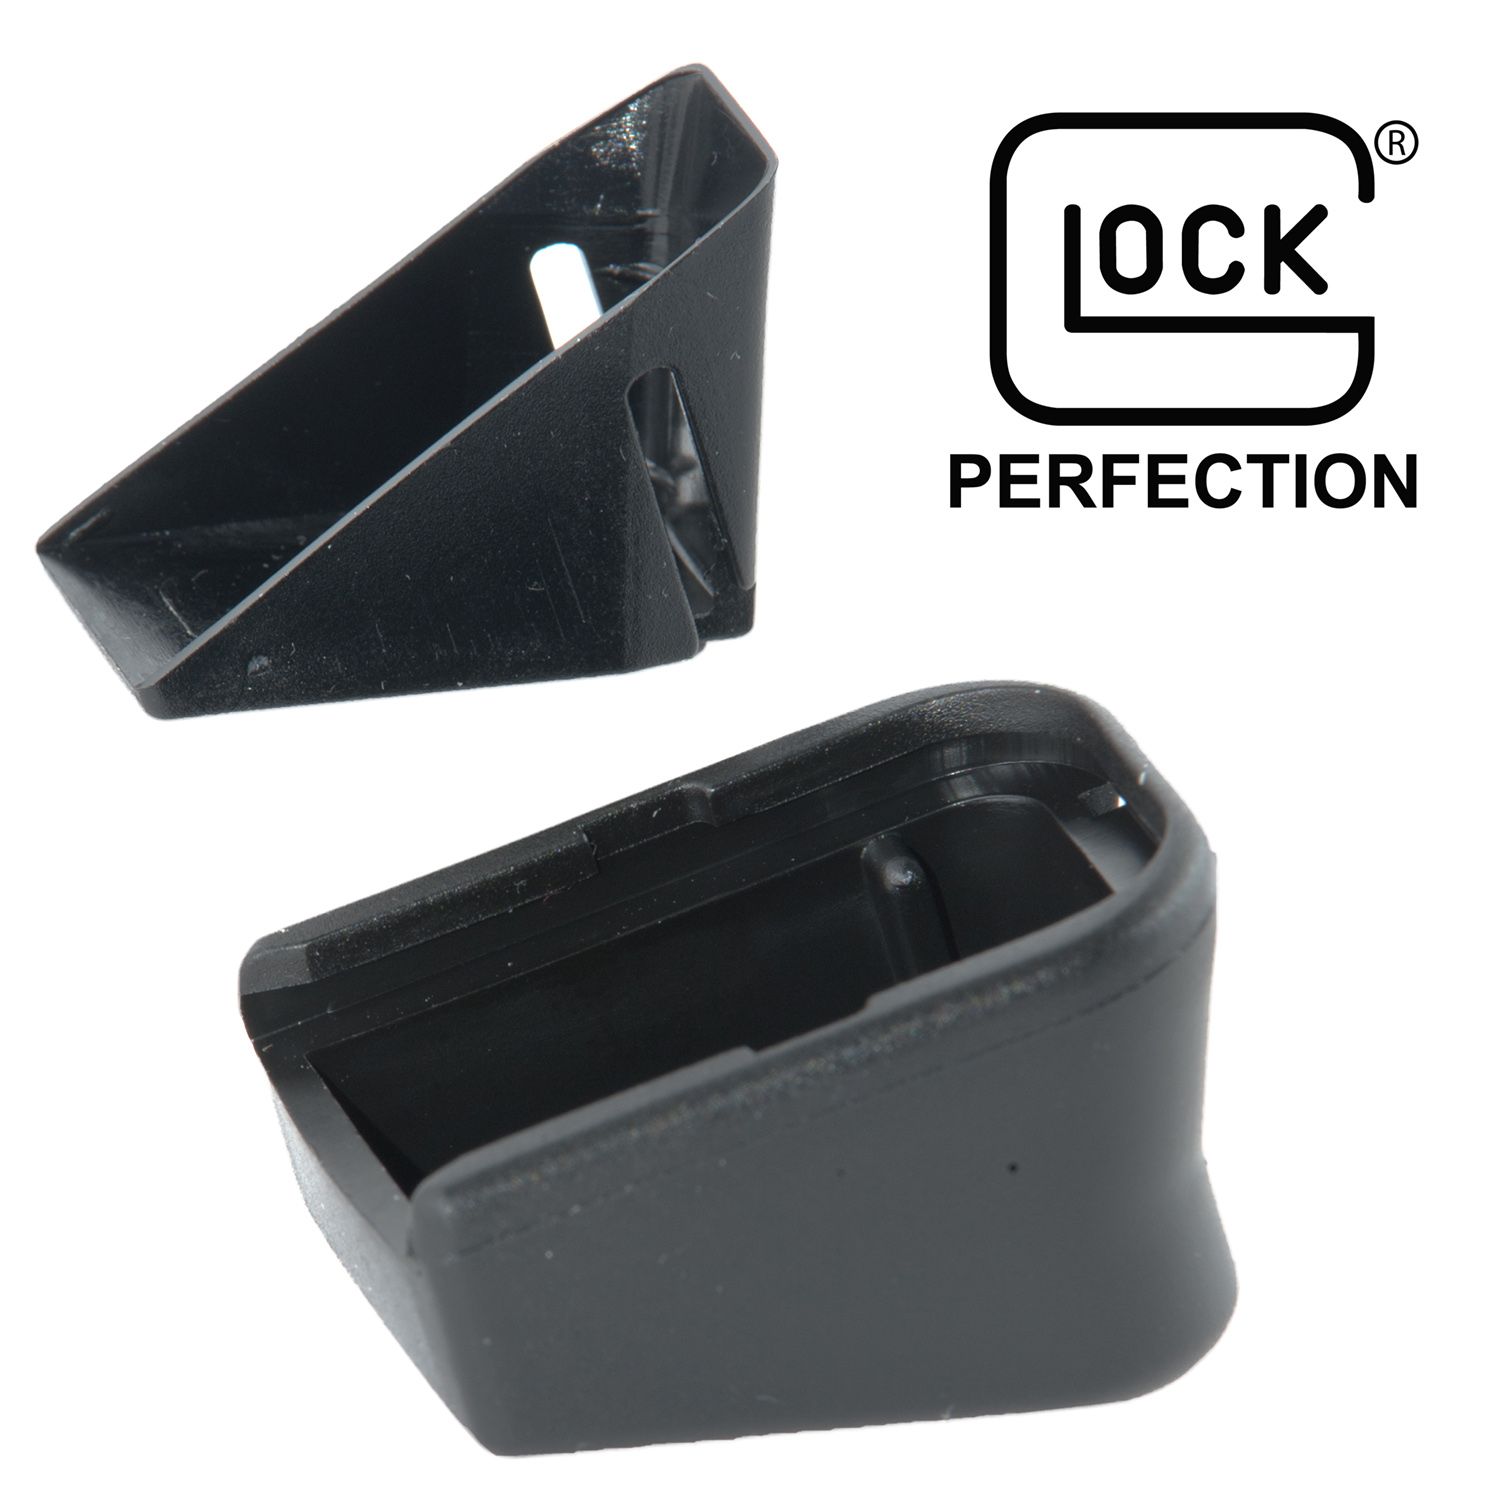 2 per package MAGAZINE EXTENSION FOR GLOCK 19 17 22 23 34 35 and more